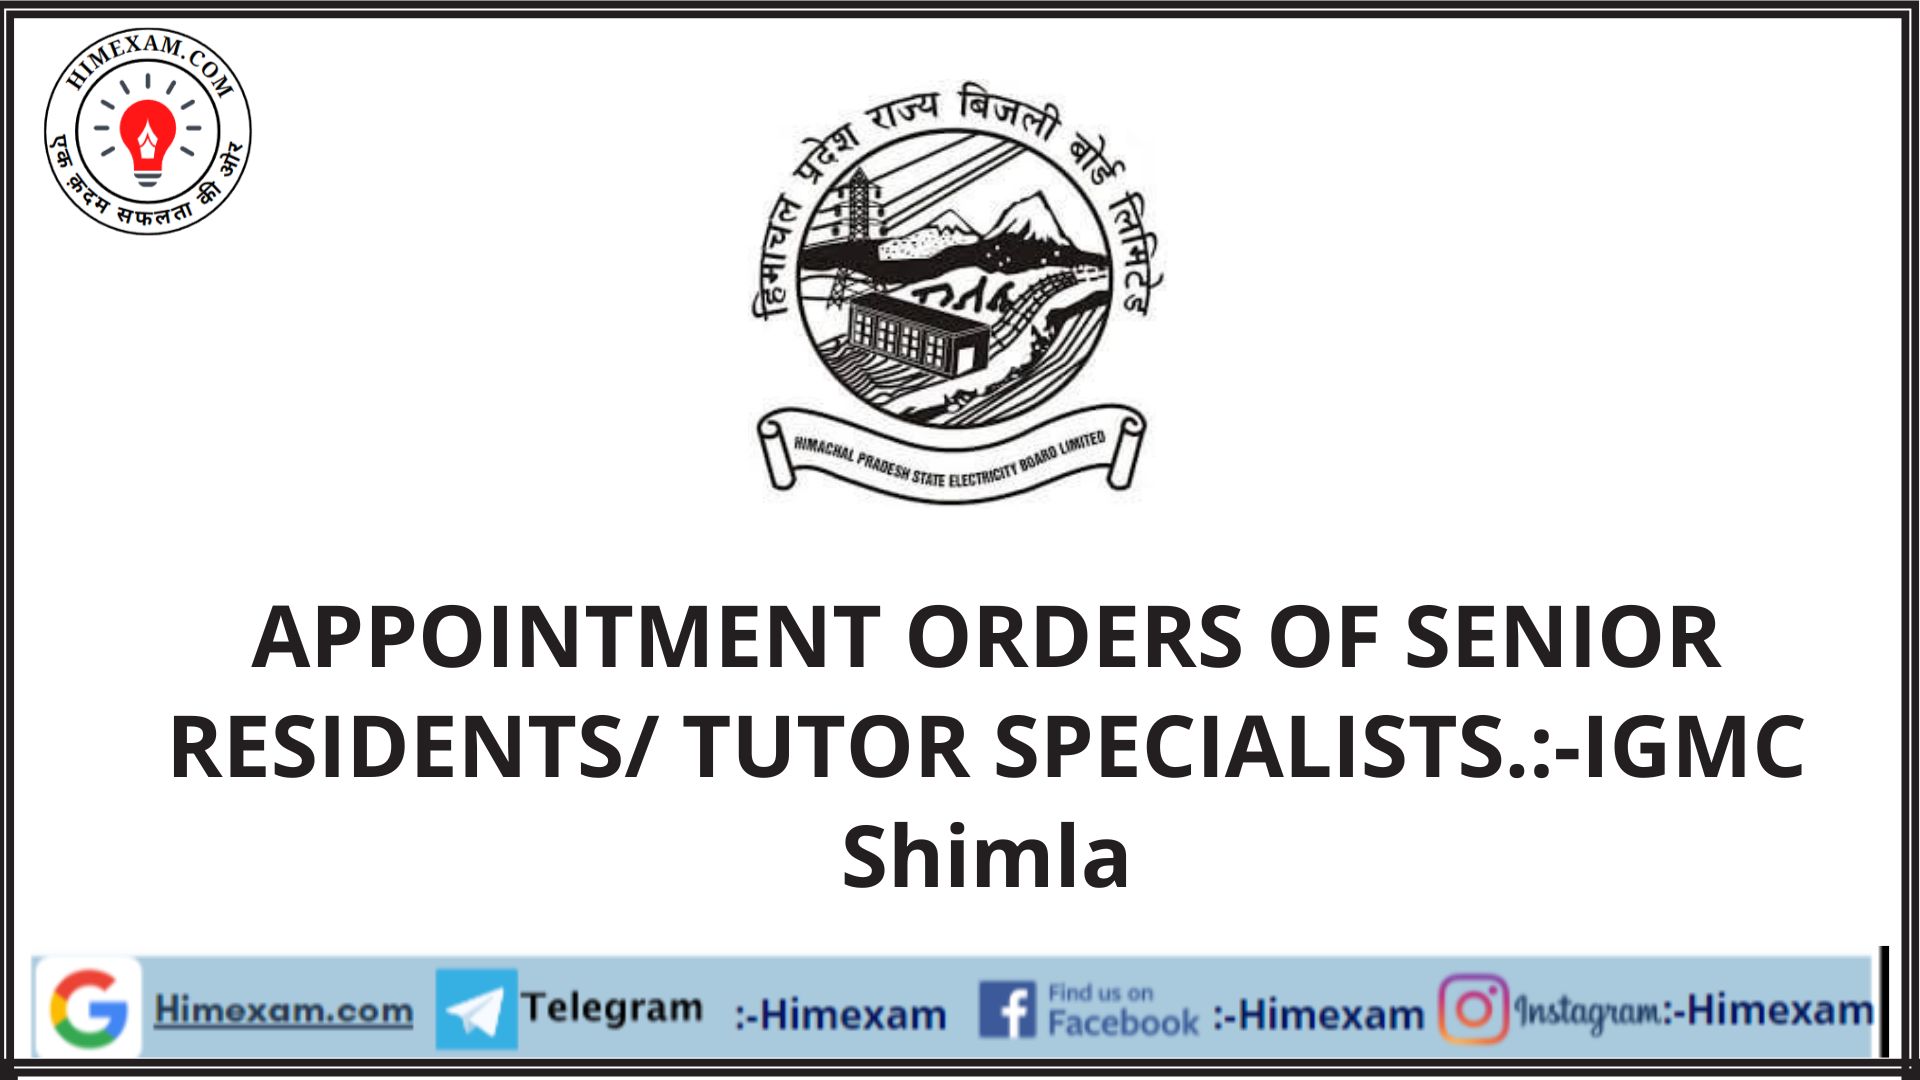 APPOINTMENT ORDERS OF SENIOR RESIDENTS/ TUTOR SPECIALISTS.:-IGMC Shimla